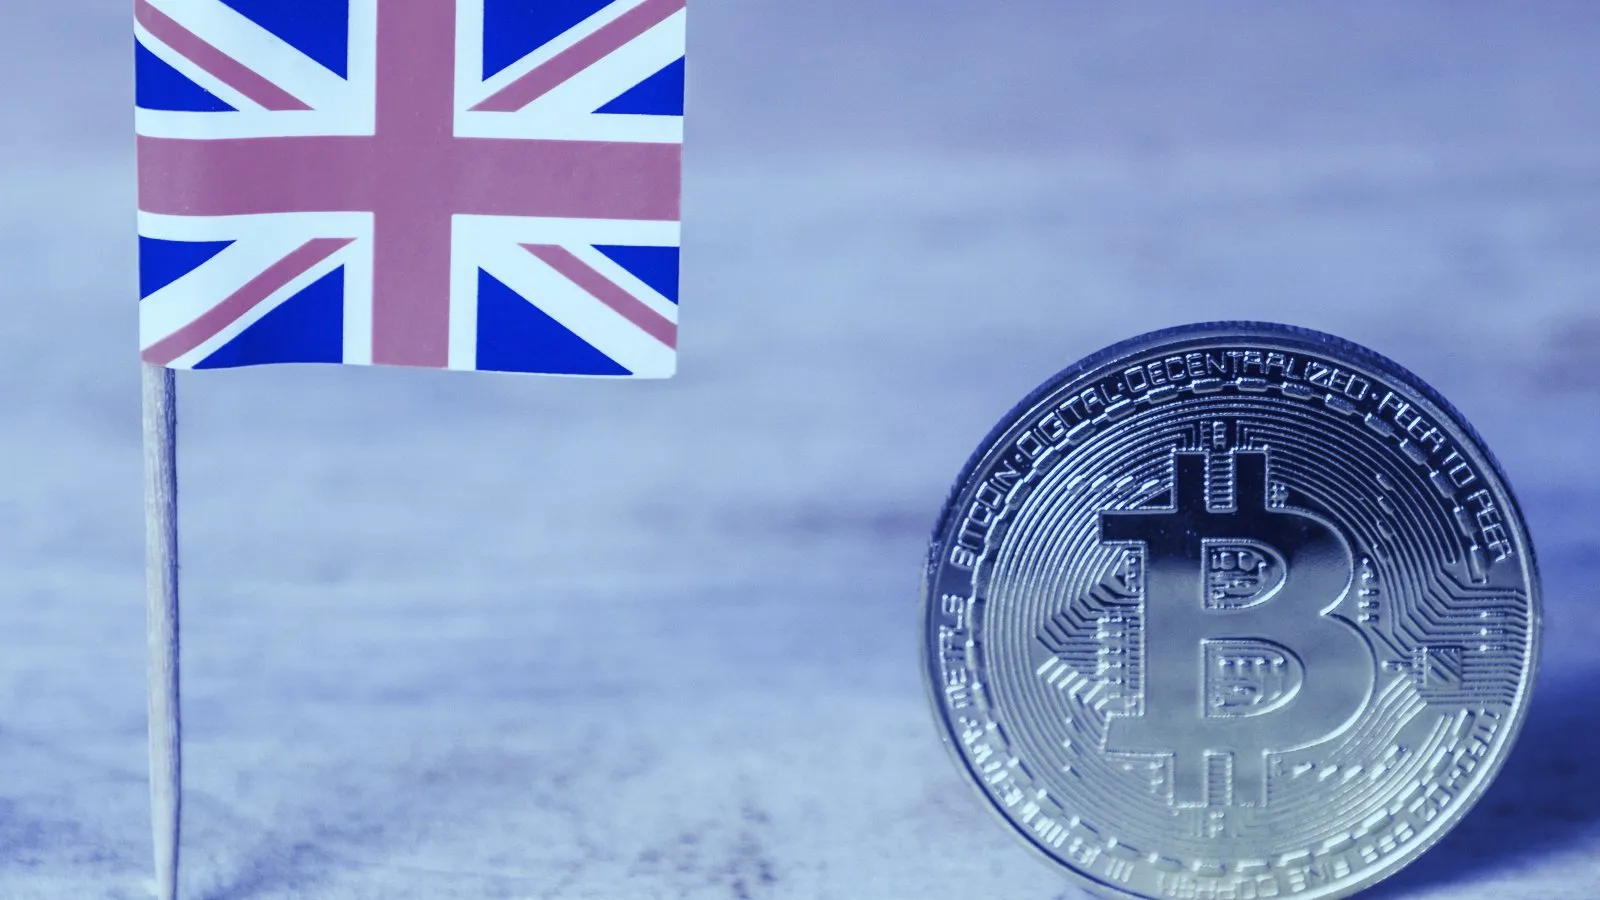 Binance's British arm will help "develop a supportive regulatory framework for cryptoassets" in the UK. (Image: Shutterstock)